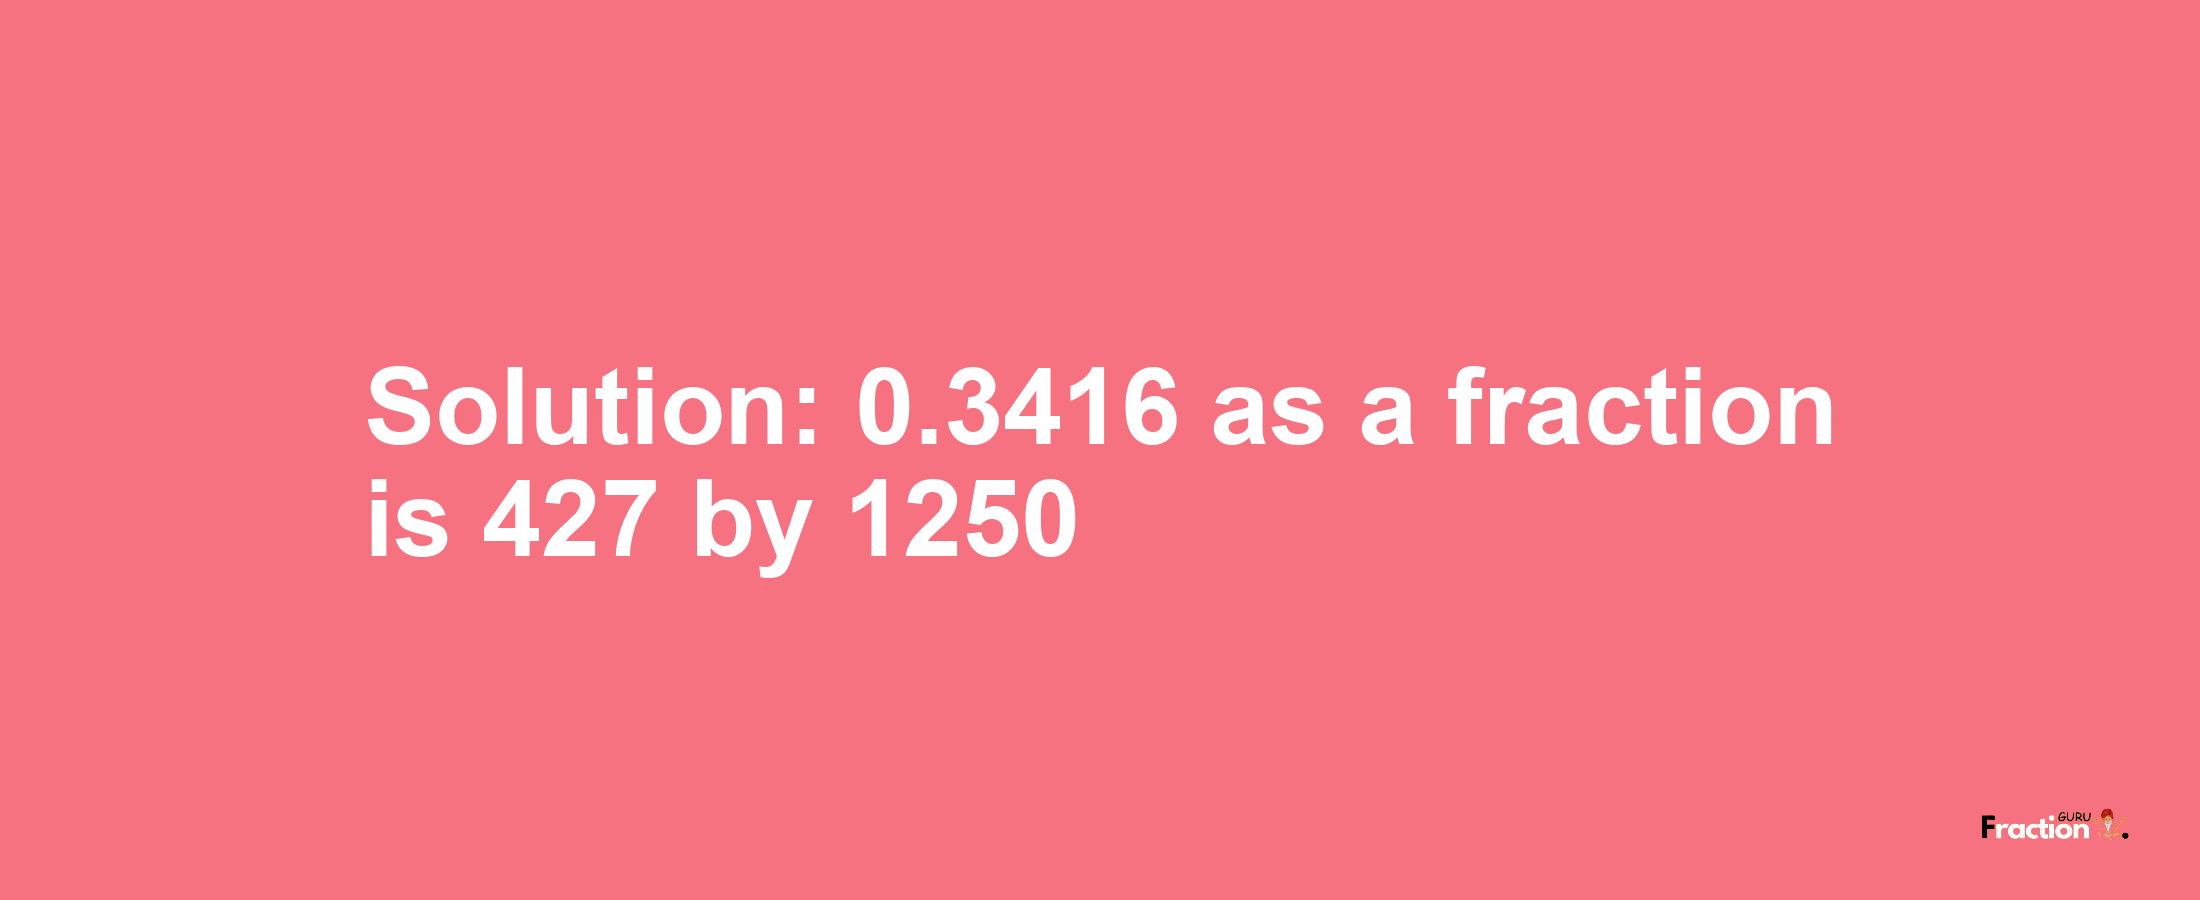 Solution:0.3416 as a fraction is 427/1250